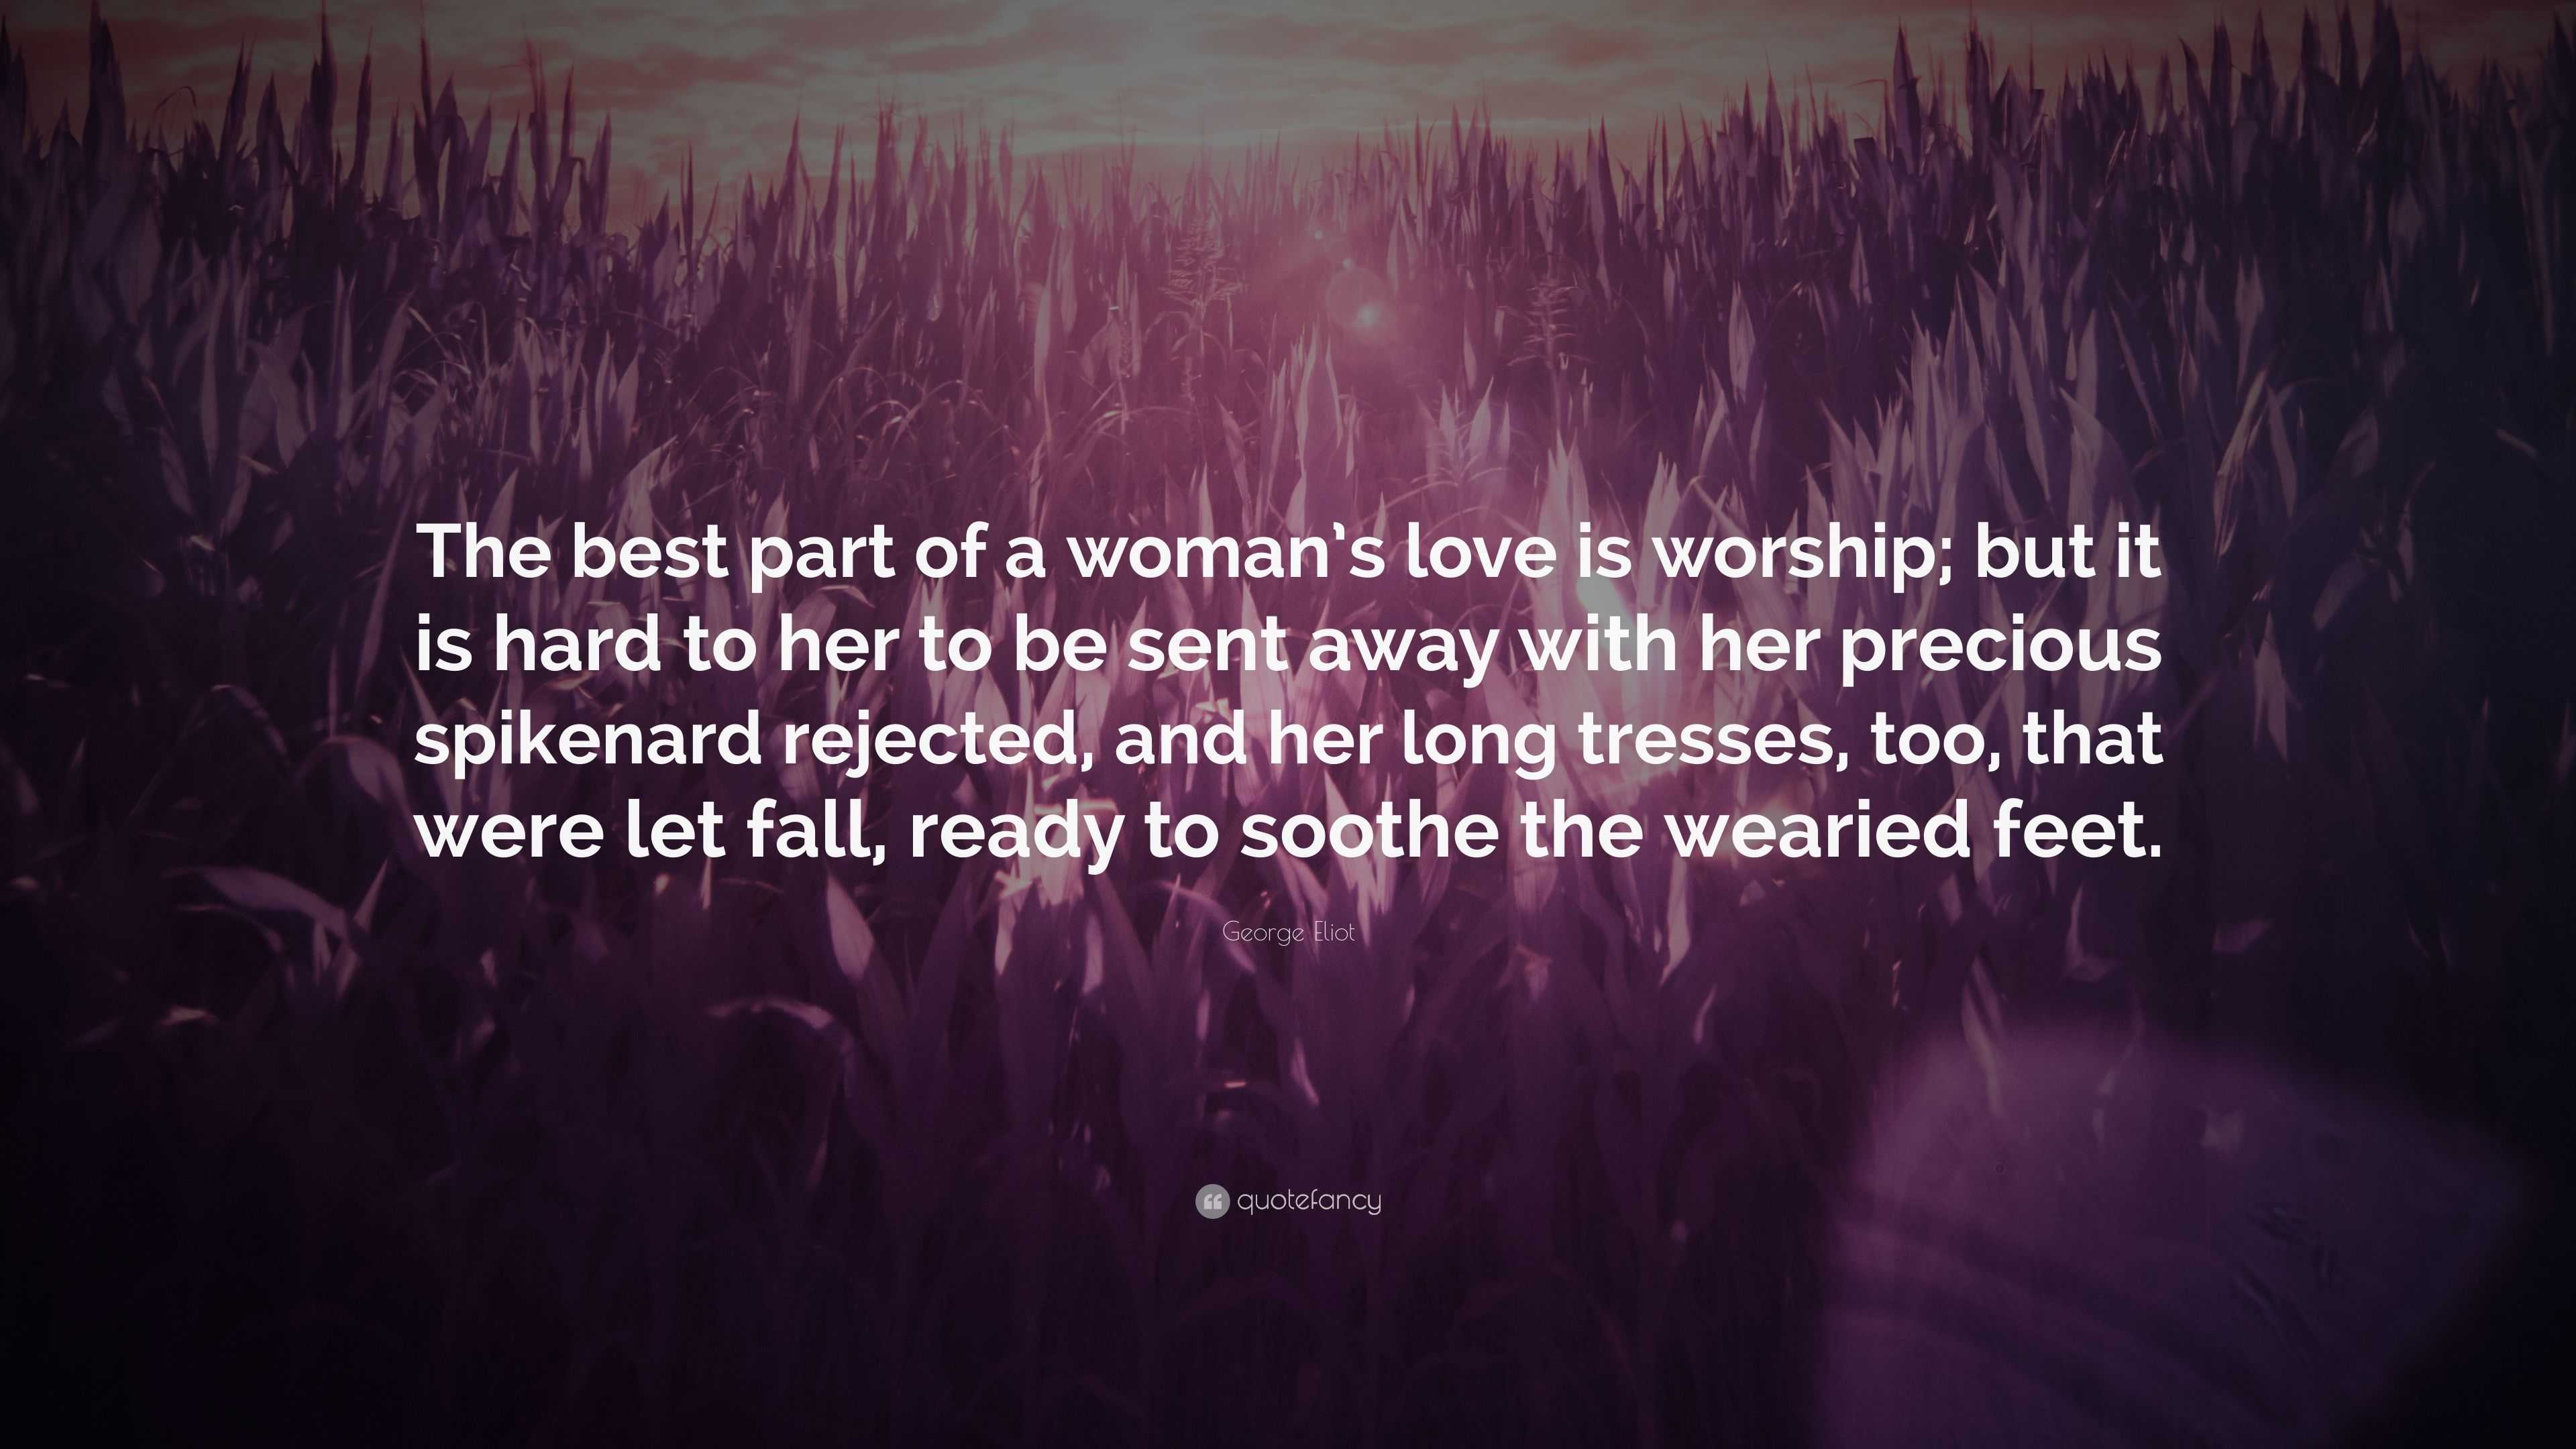 George Eliot Quote “The best part of a woman s love is worship but